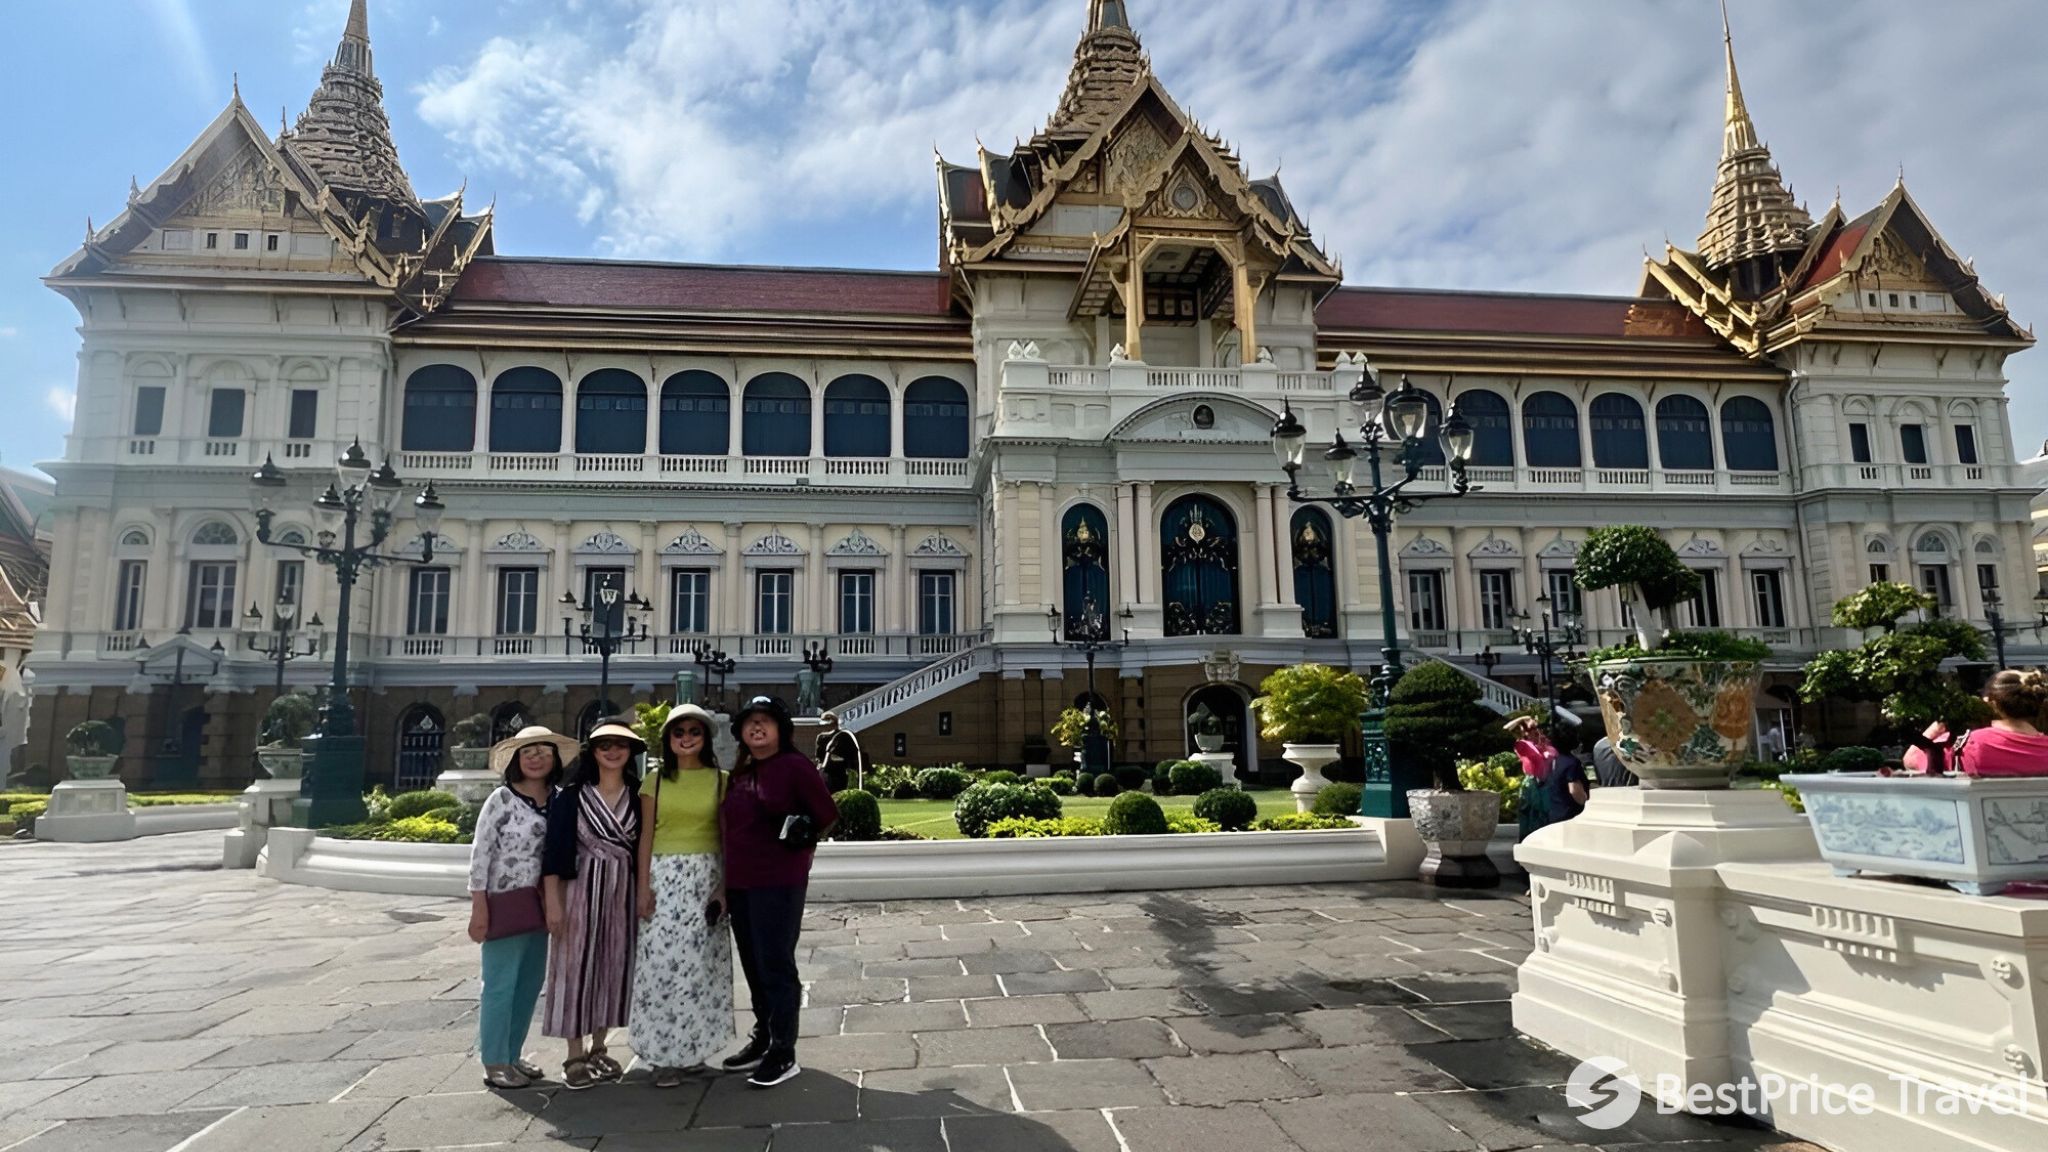 Day 2 Come Discovering The Impressive Architecture Of Grand Palace